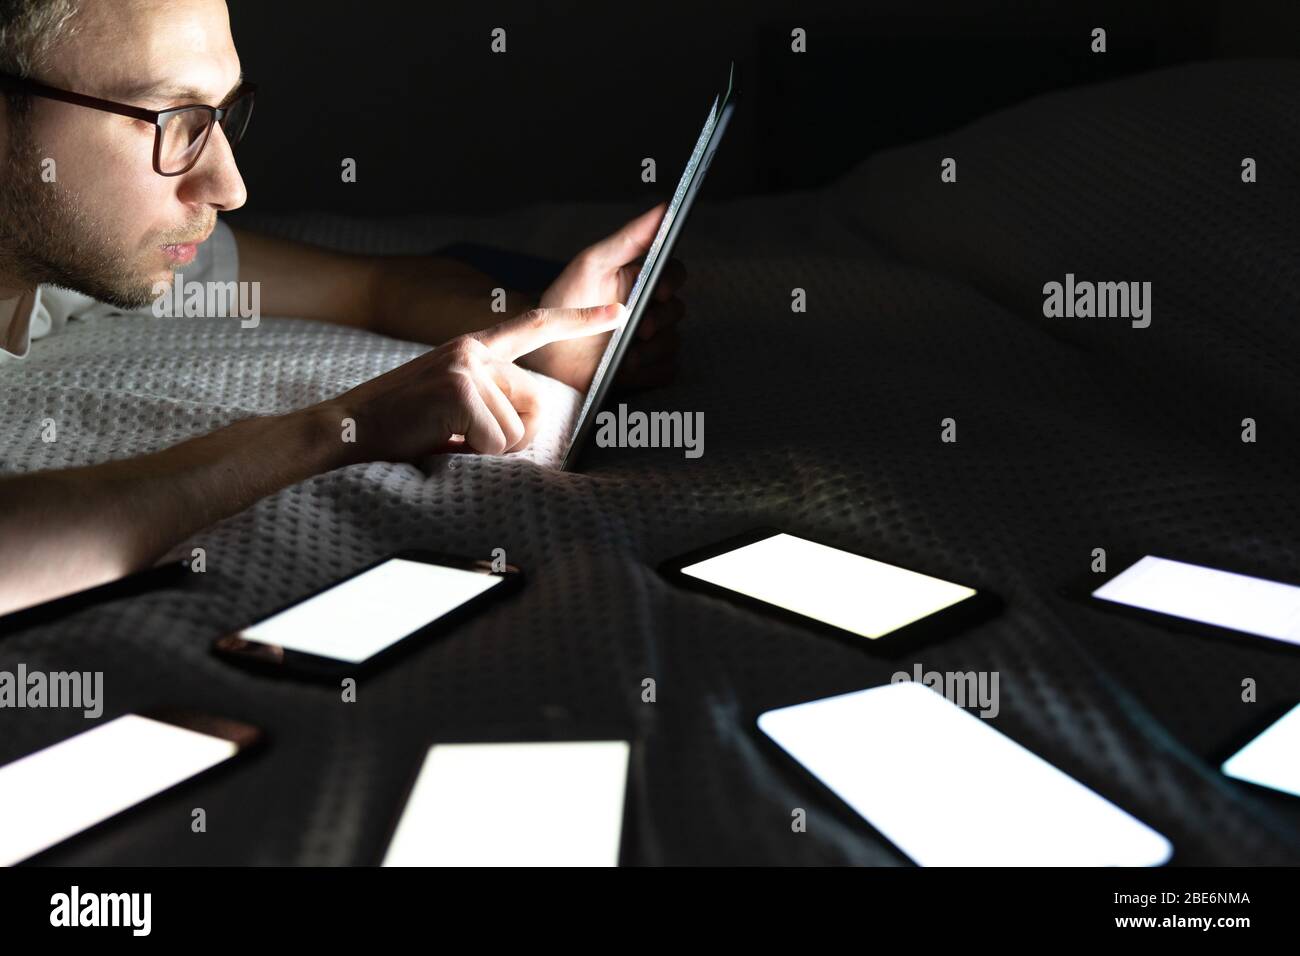 Addiction, nomophobia, insomnia, sleep disorder. Gadget addicted man using tablet at late night, chatting on social networks, lying in bed around the Stock Photo